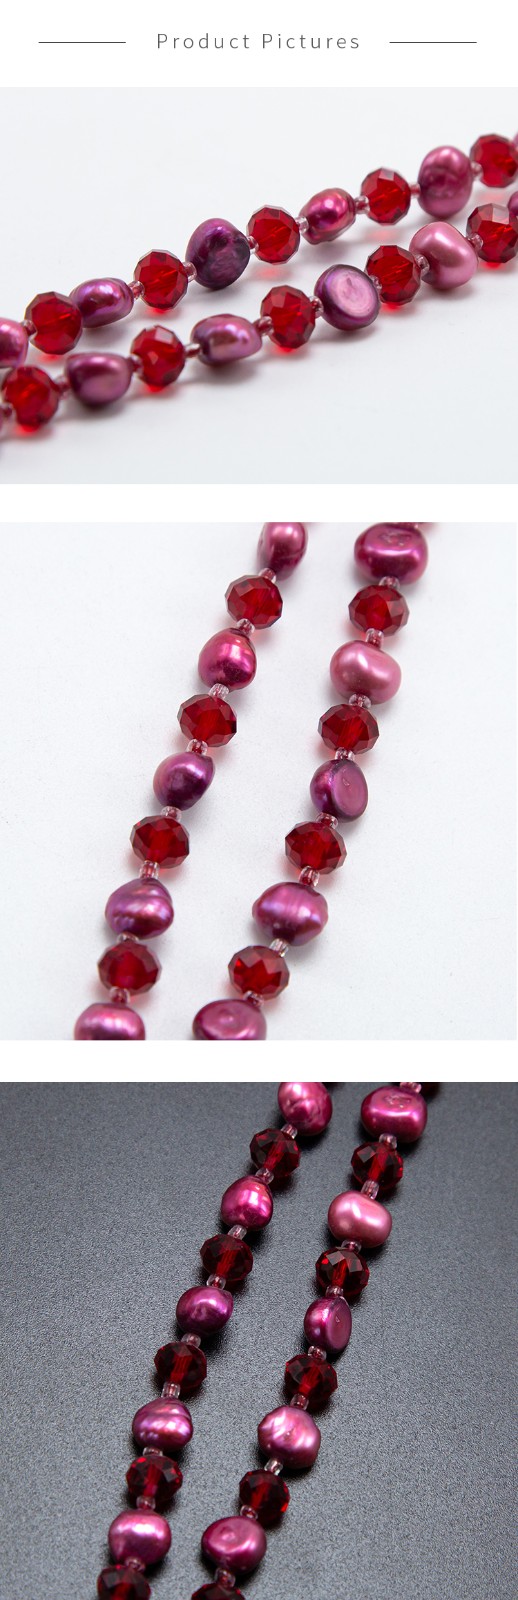 8x6mm Red Faceted Rondelle Glass Beads and Dyed Pearl Bead